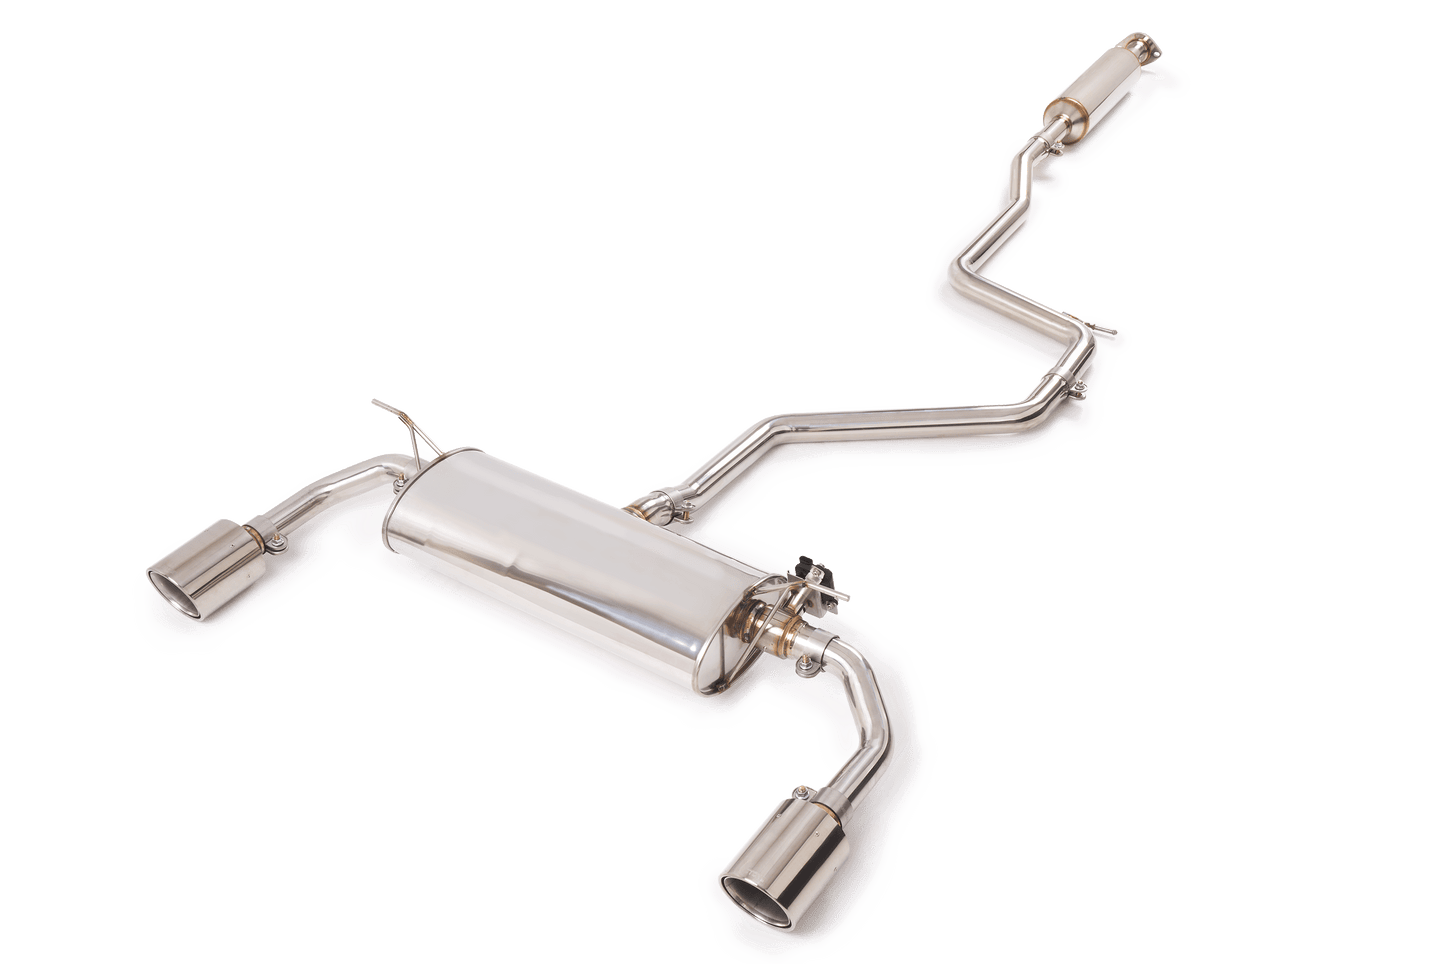 Stone Exhaust Ford 1.5T MK4 Focus Dual Exit Single Tailpipe Valvetronic Catback Exhaust System